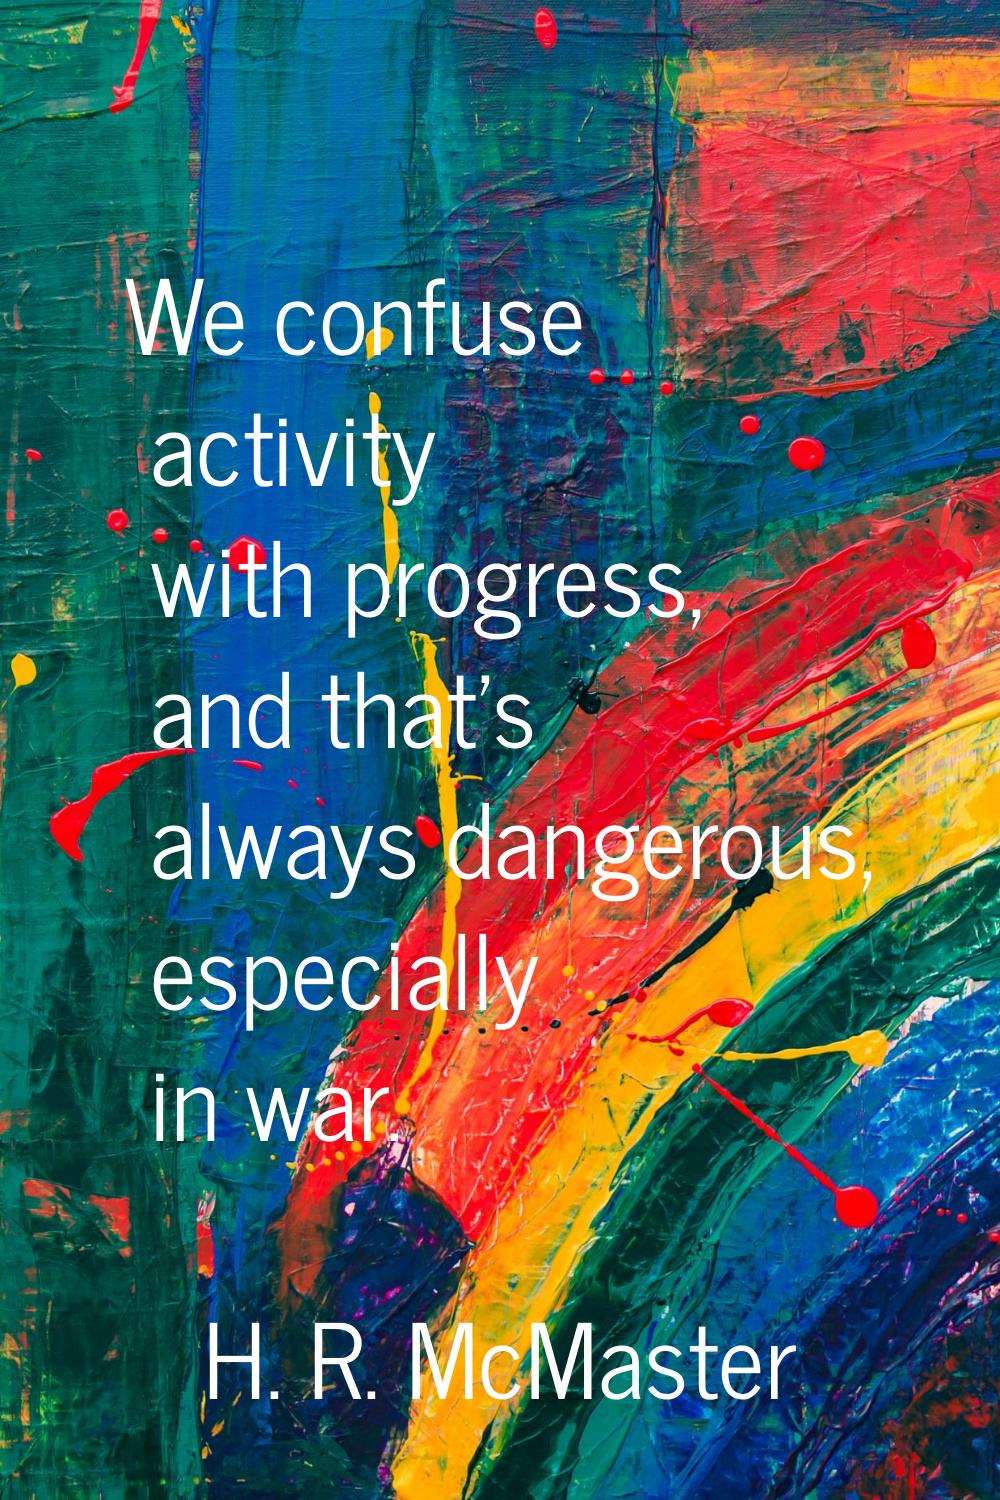 We confuse activity with progress, and that's always dangerous, especially in war.